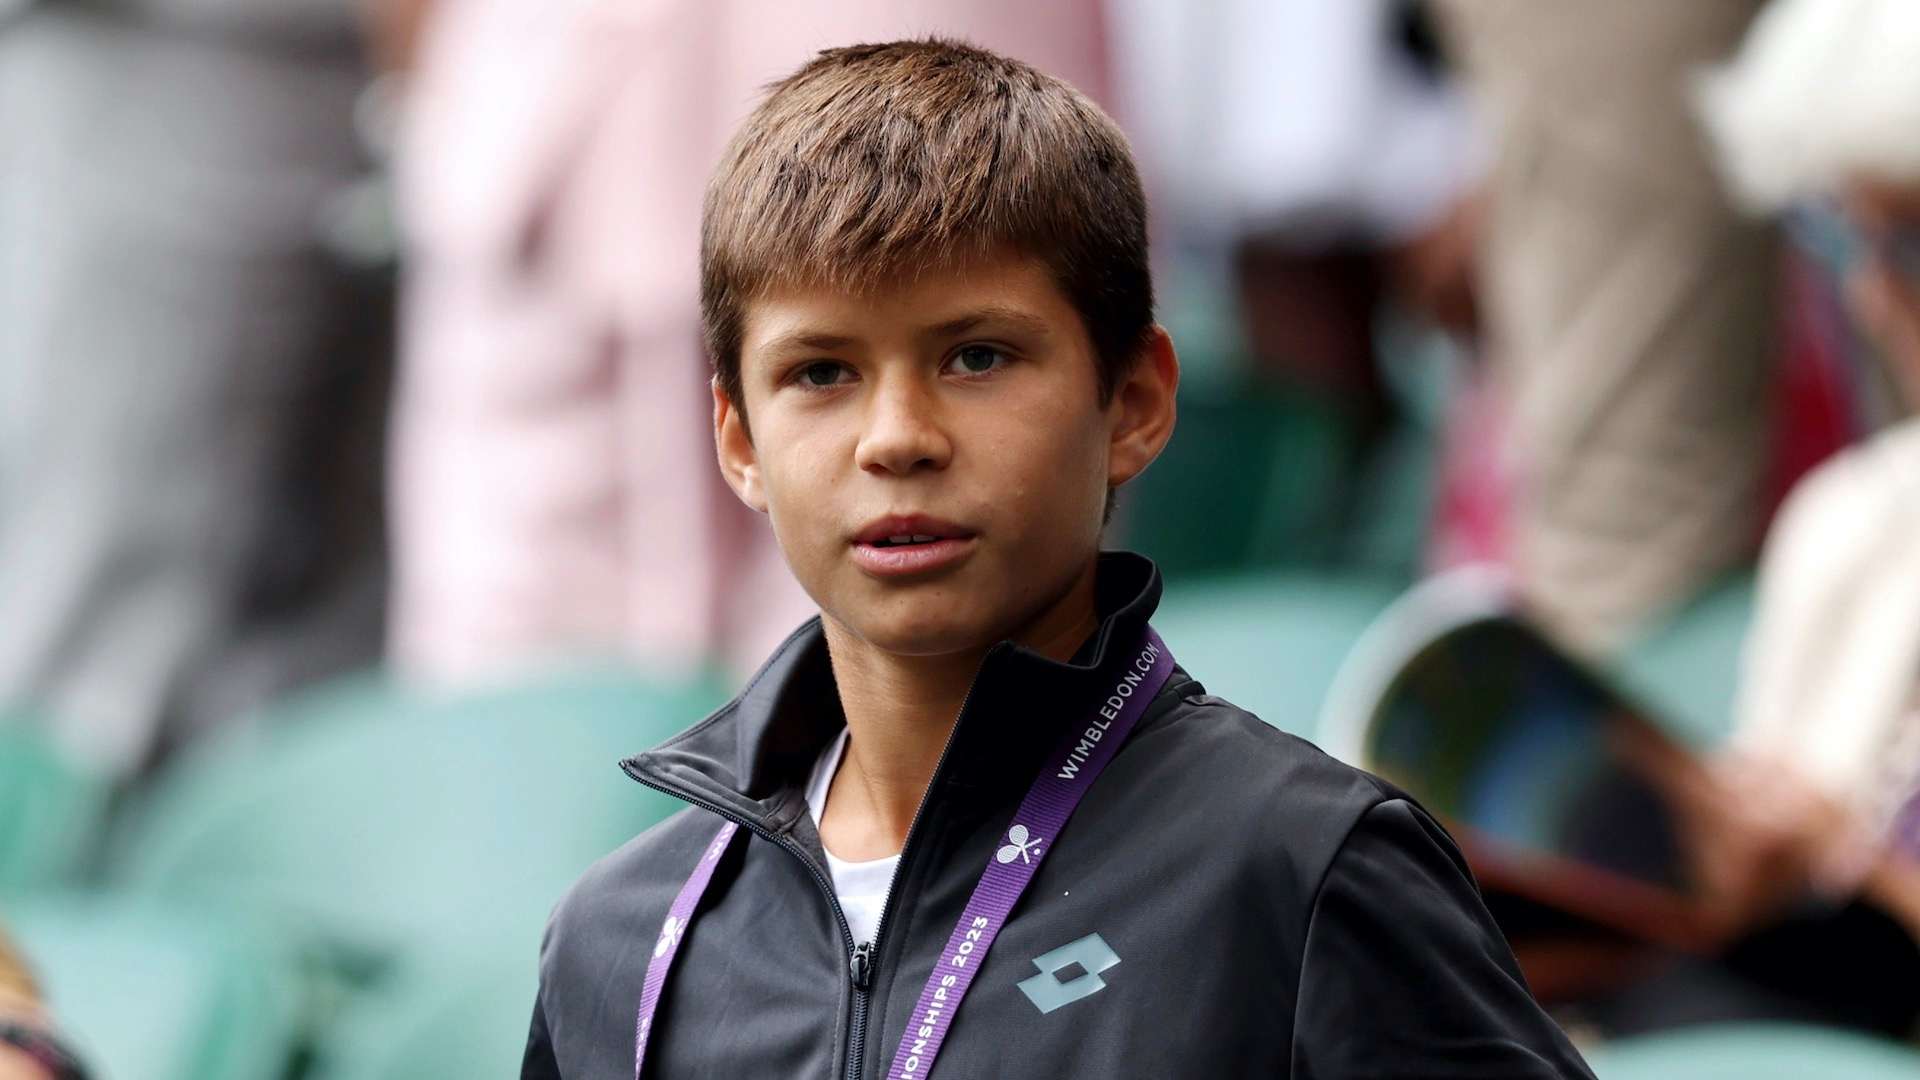 Jaime Alcaraz supported his older brother Carlos during the World No. 1's Wimbledon triumph last month.